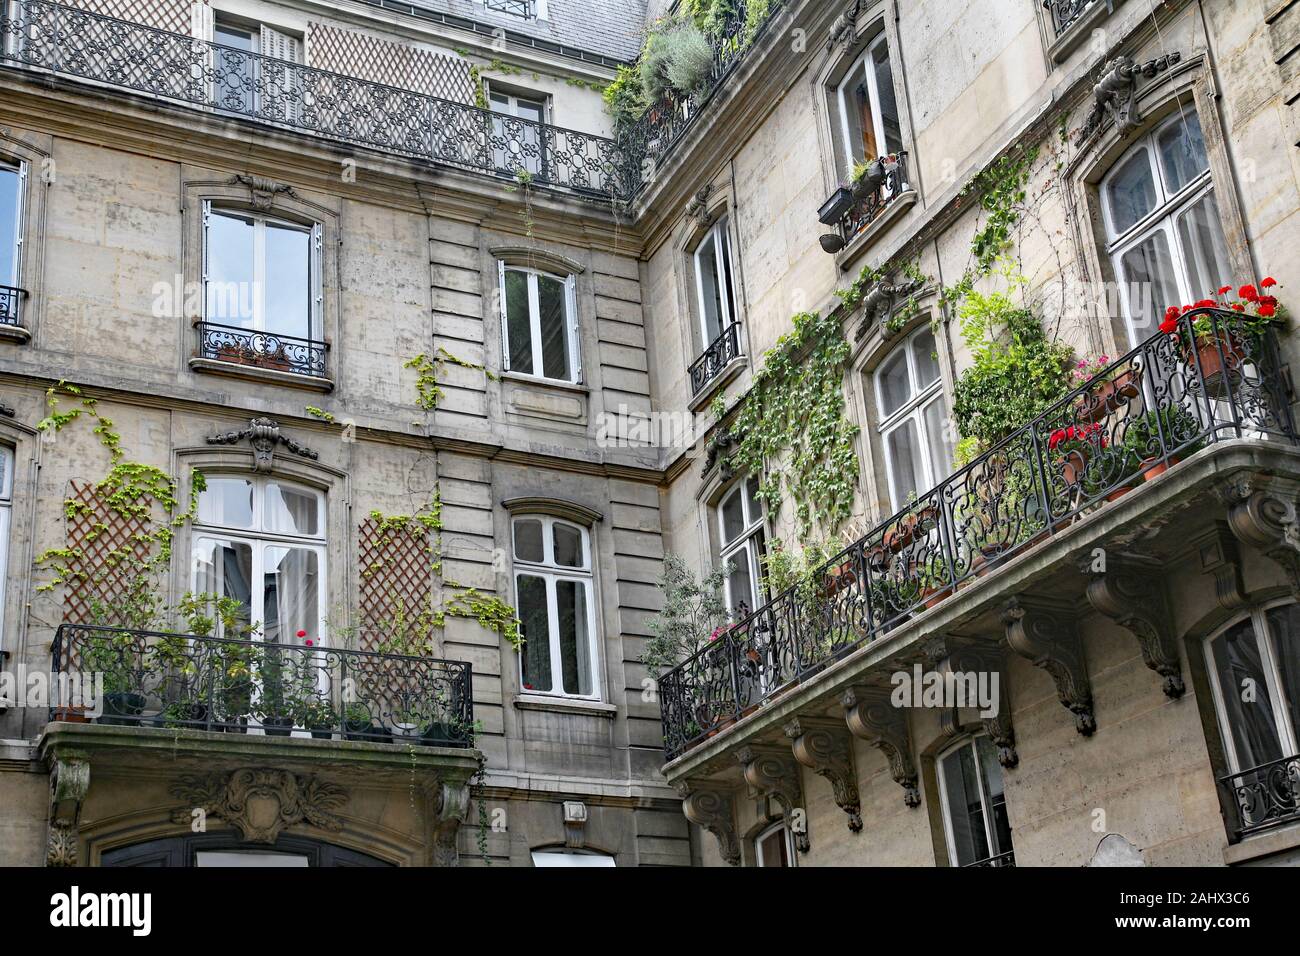 Paris, typical old apartment building with wrought iron balcony railings and planters Stock Photo